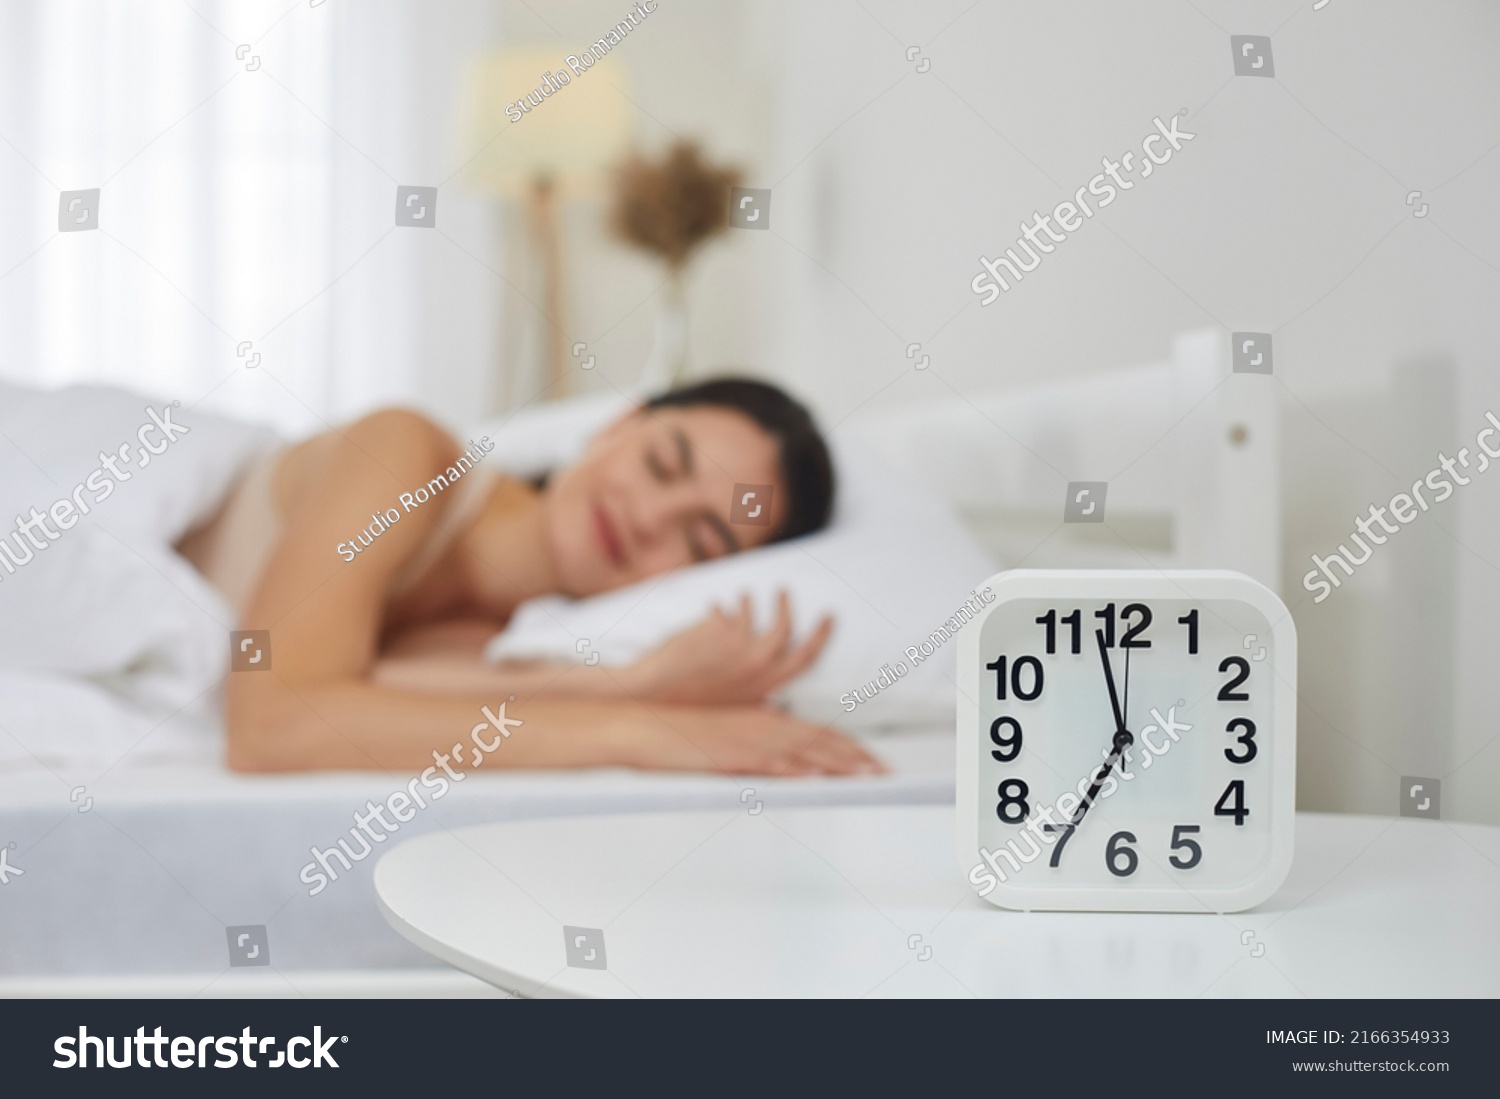 Close up of white plastic alarm clock set for 7 AM on bedside table in bedroom, with happy peaceful tranquil young woman sleeping on bed in blurred background. Sleep, morning, daily routine concepts #2166354933